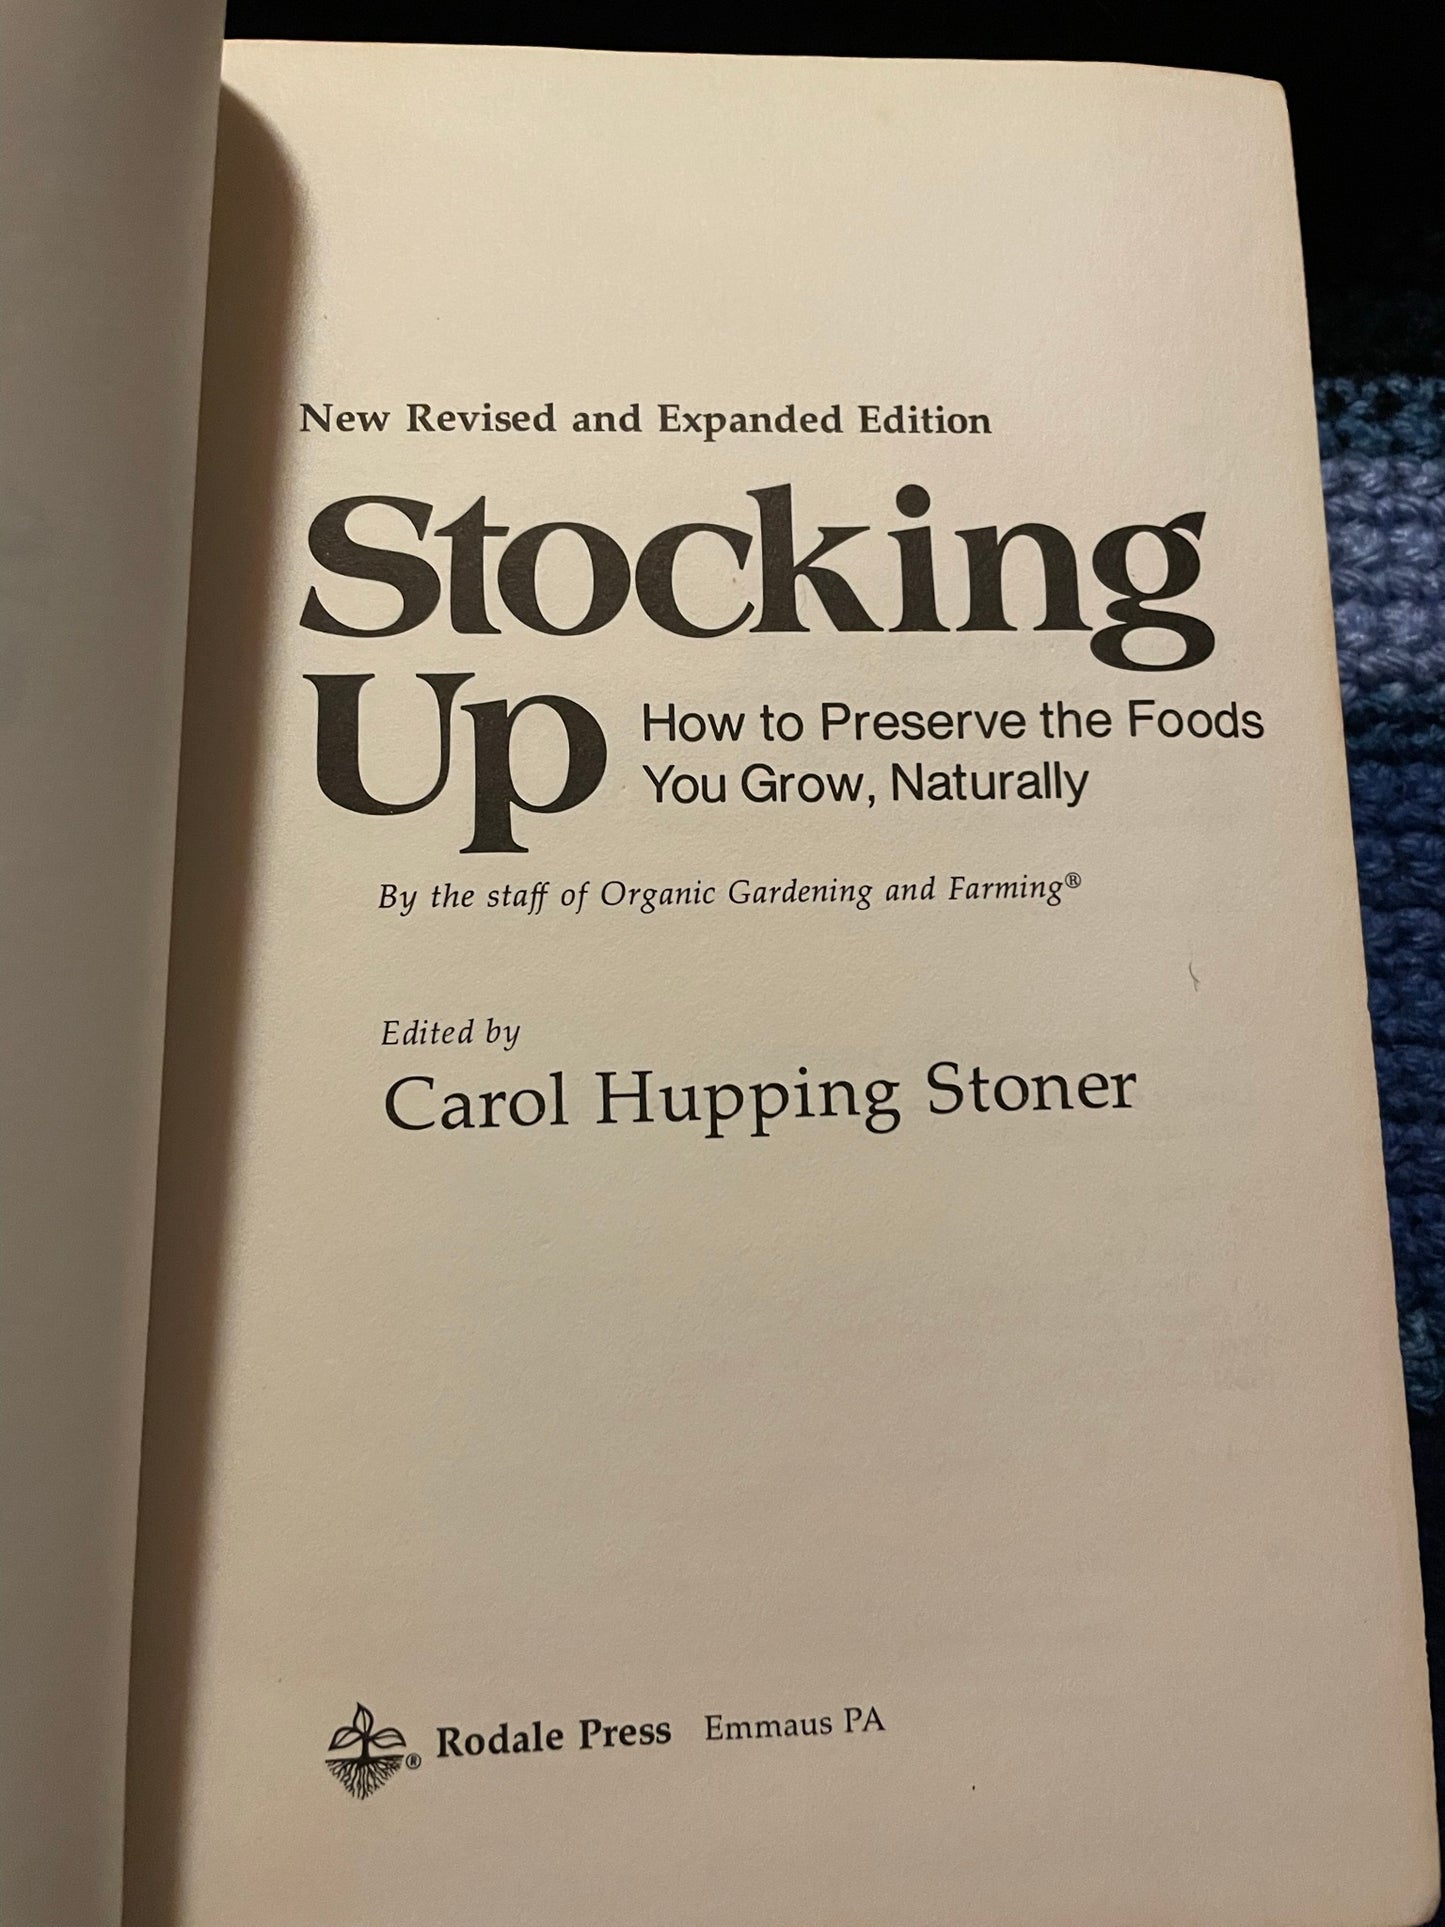 Hupping Stoner, Carol: Stocking Up - How to Preserve the Foods You Grow, Naturally (1977)